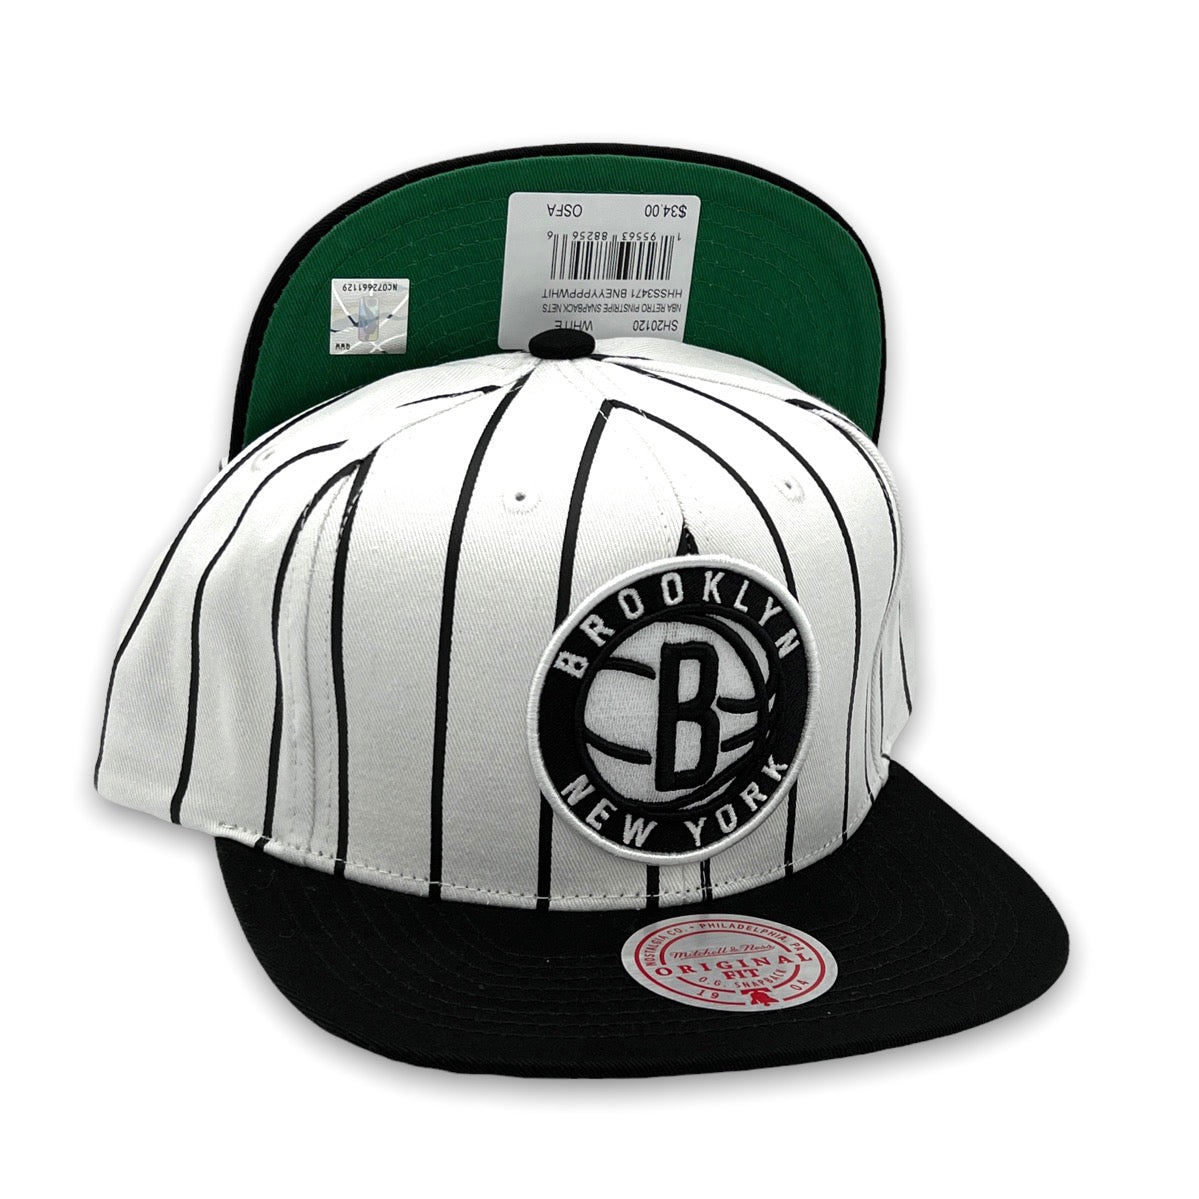 New Mitchell & Ness Brooklyn Nets Pro Crown Snapback Hat Cap Natural  White Black